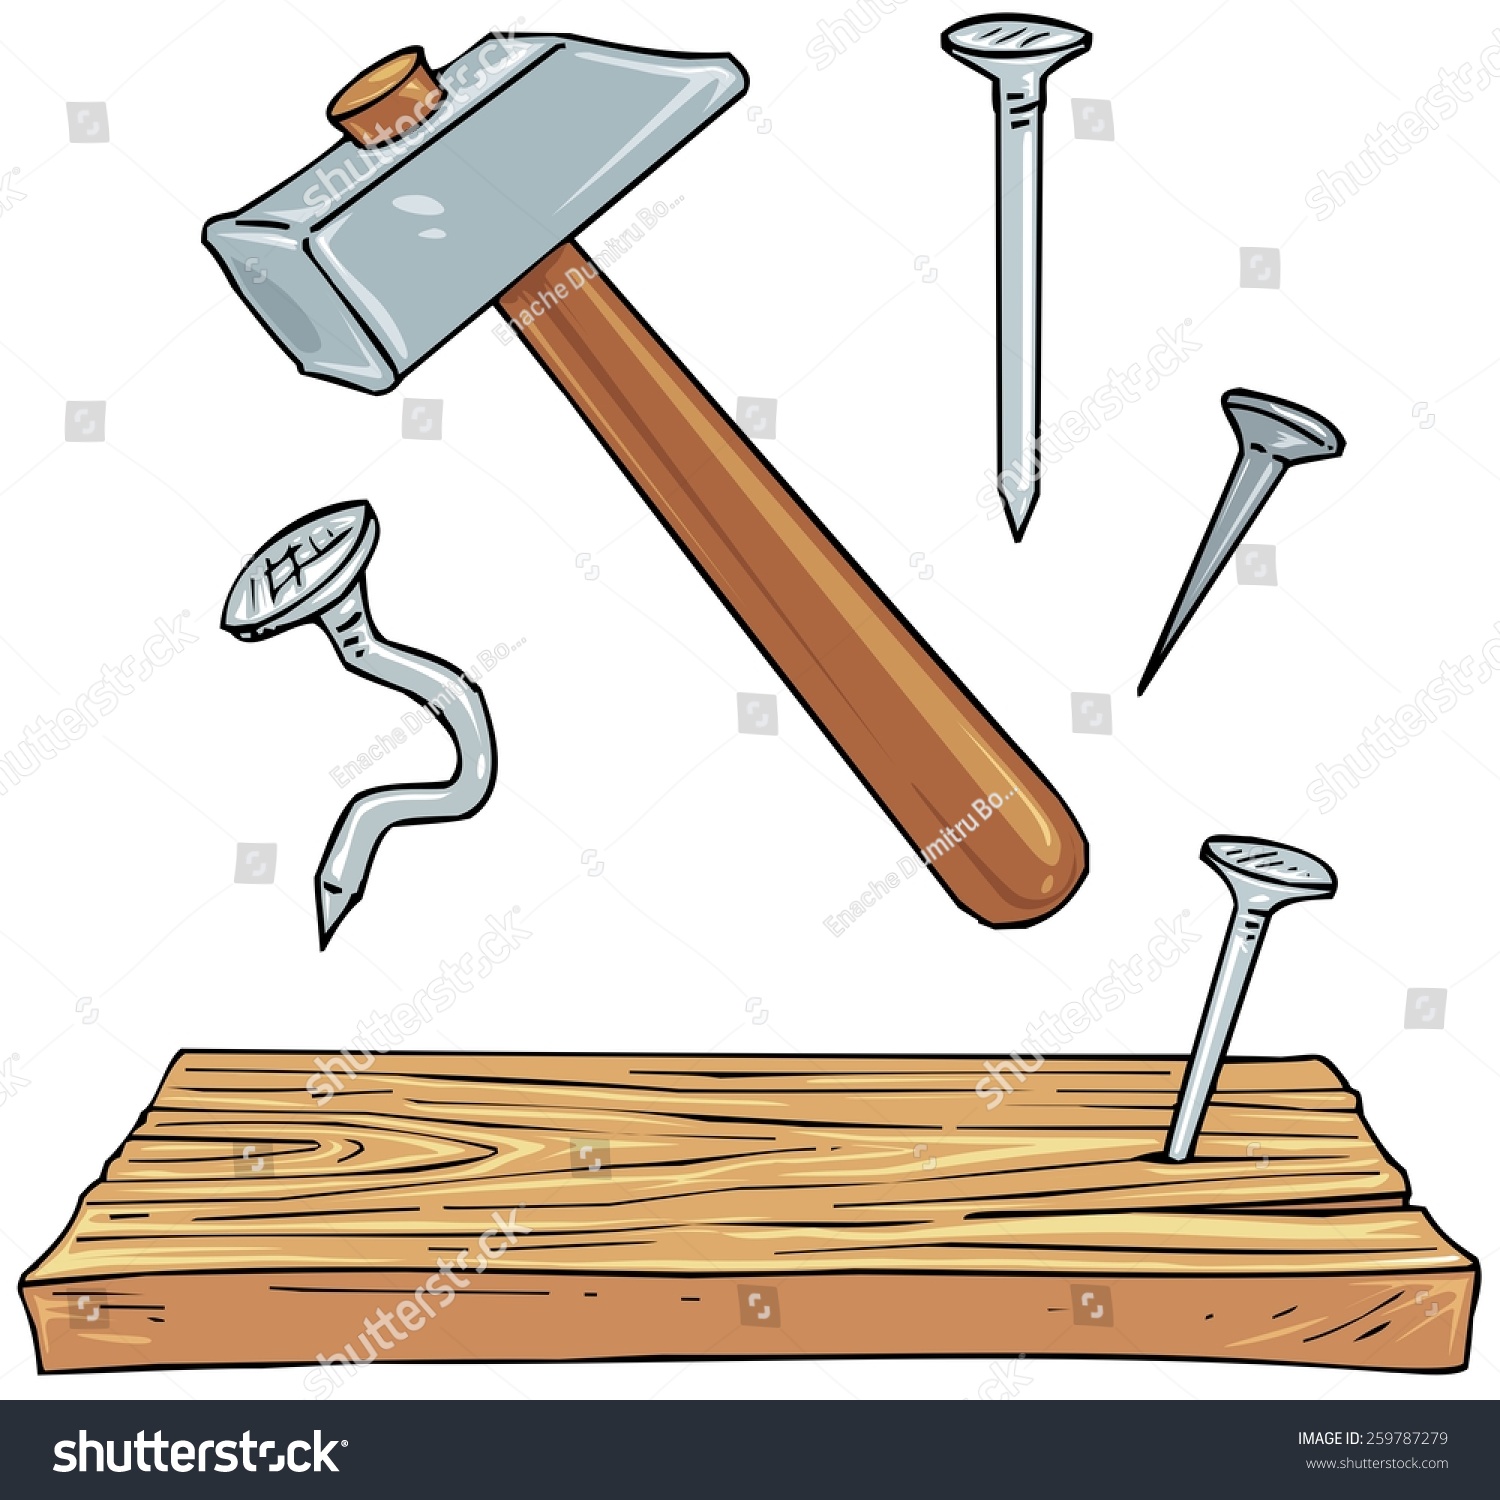 woodworking tools clipart - photo #37